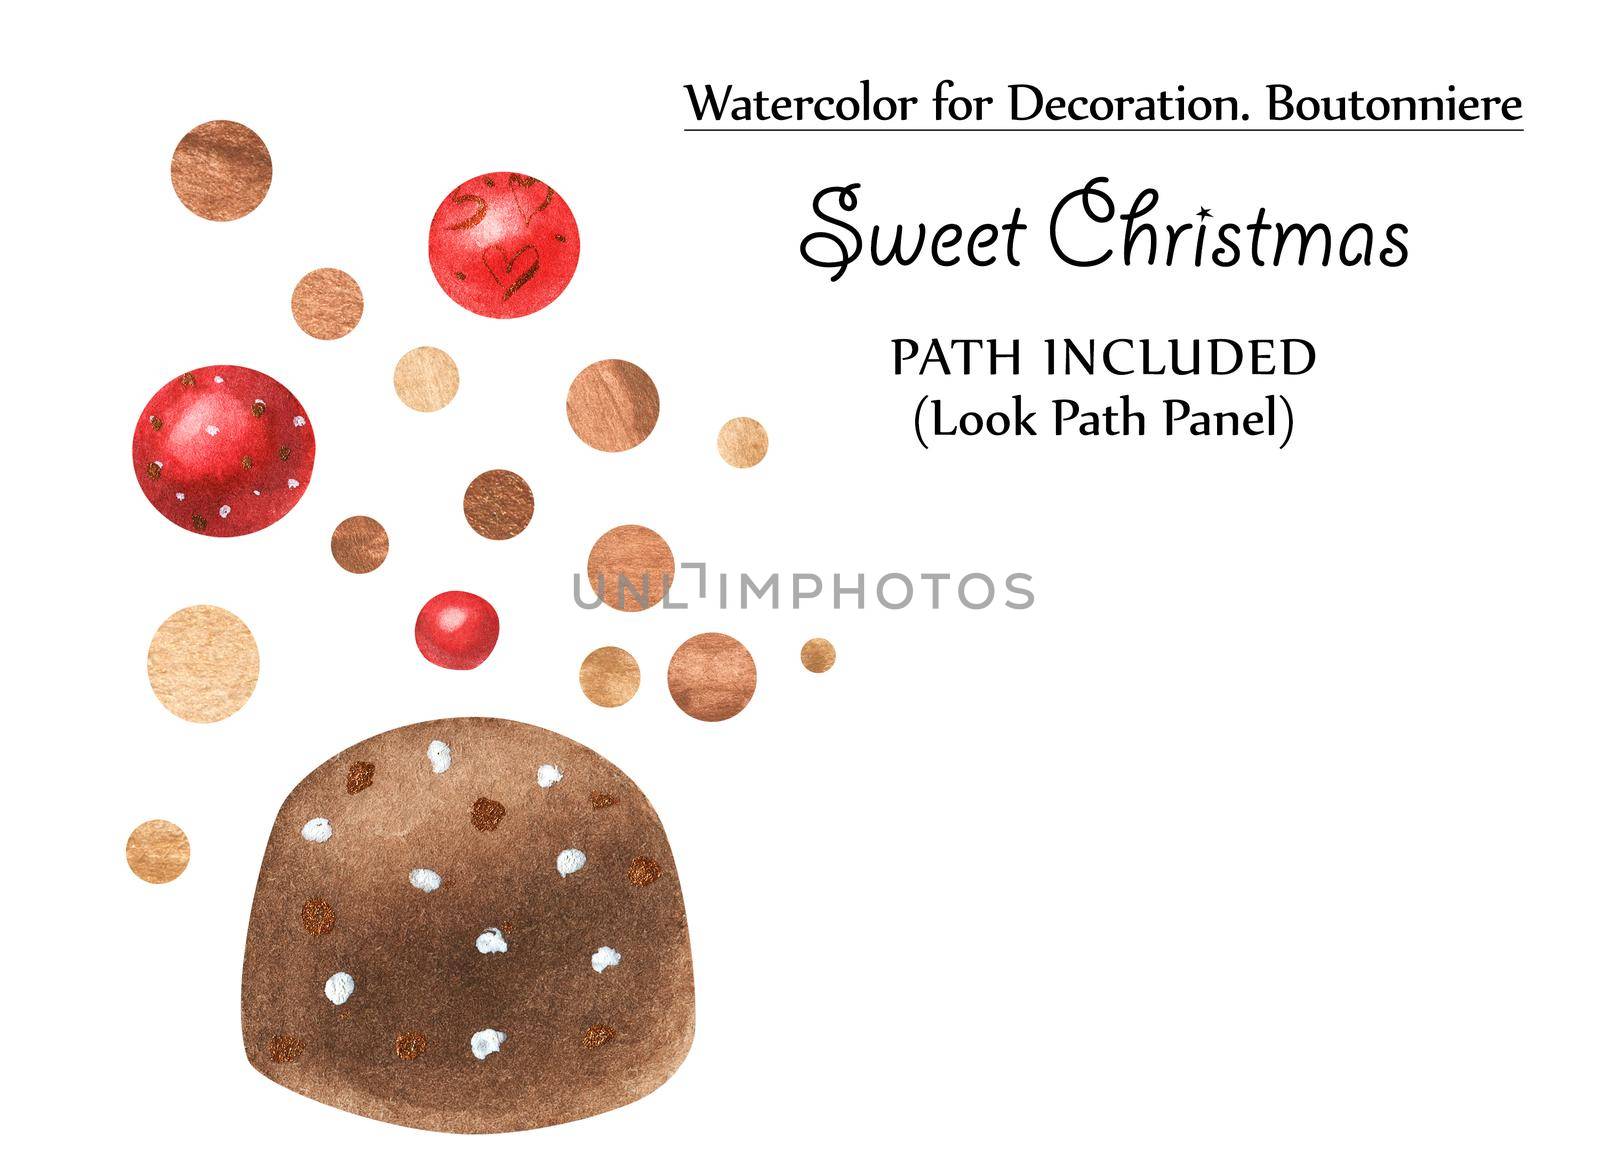 Sweet vignettes with chocolates and golden dots. Watercolor illustration, path included